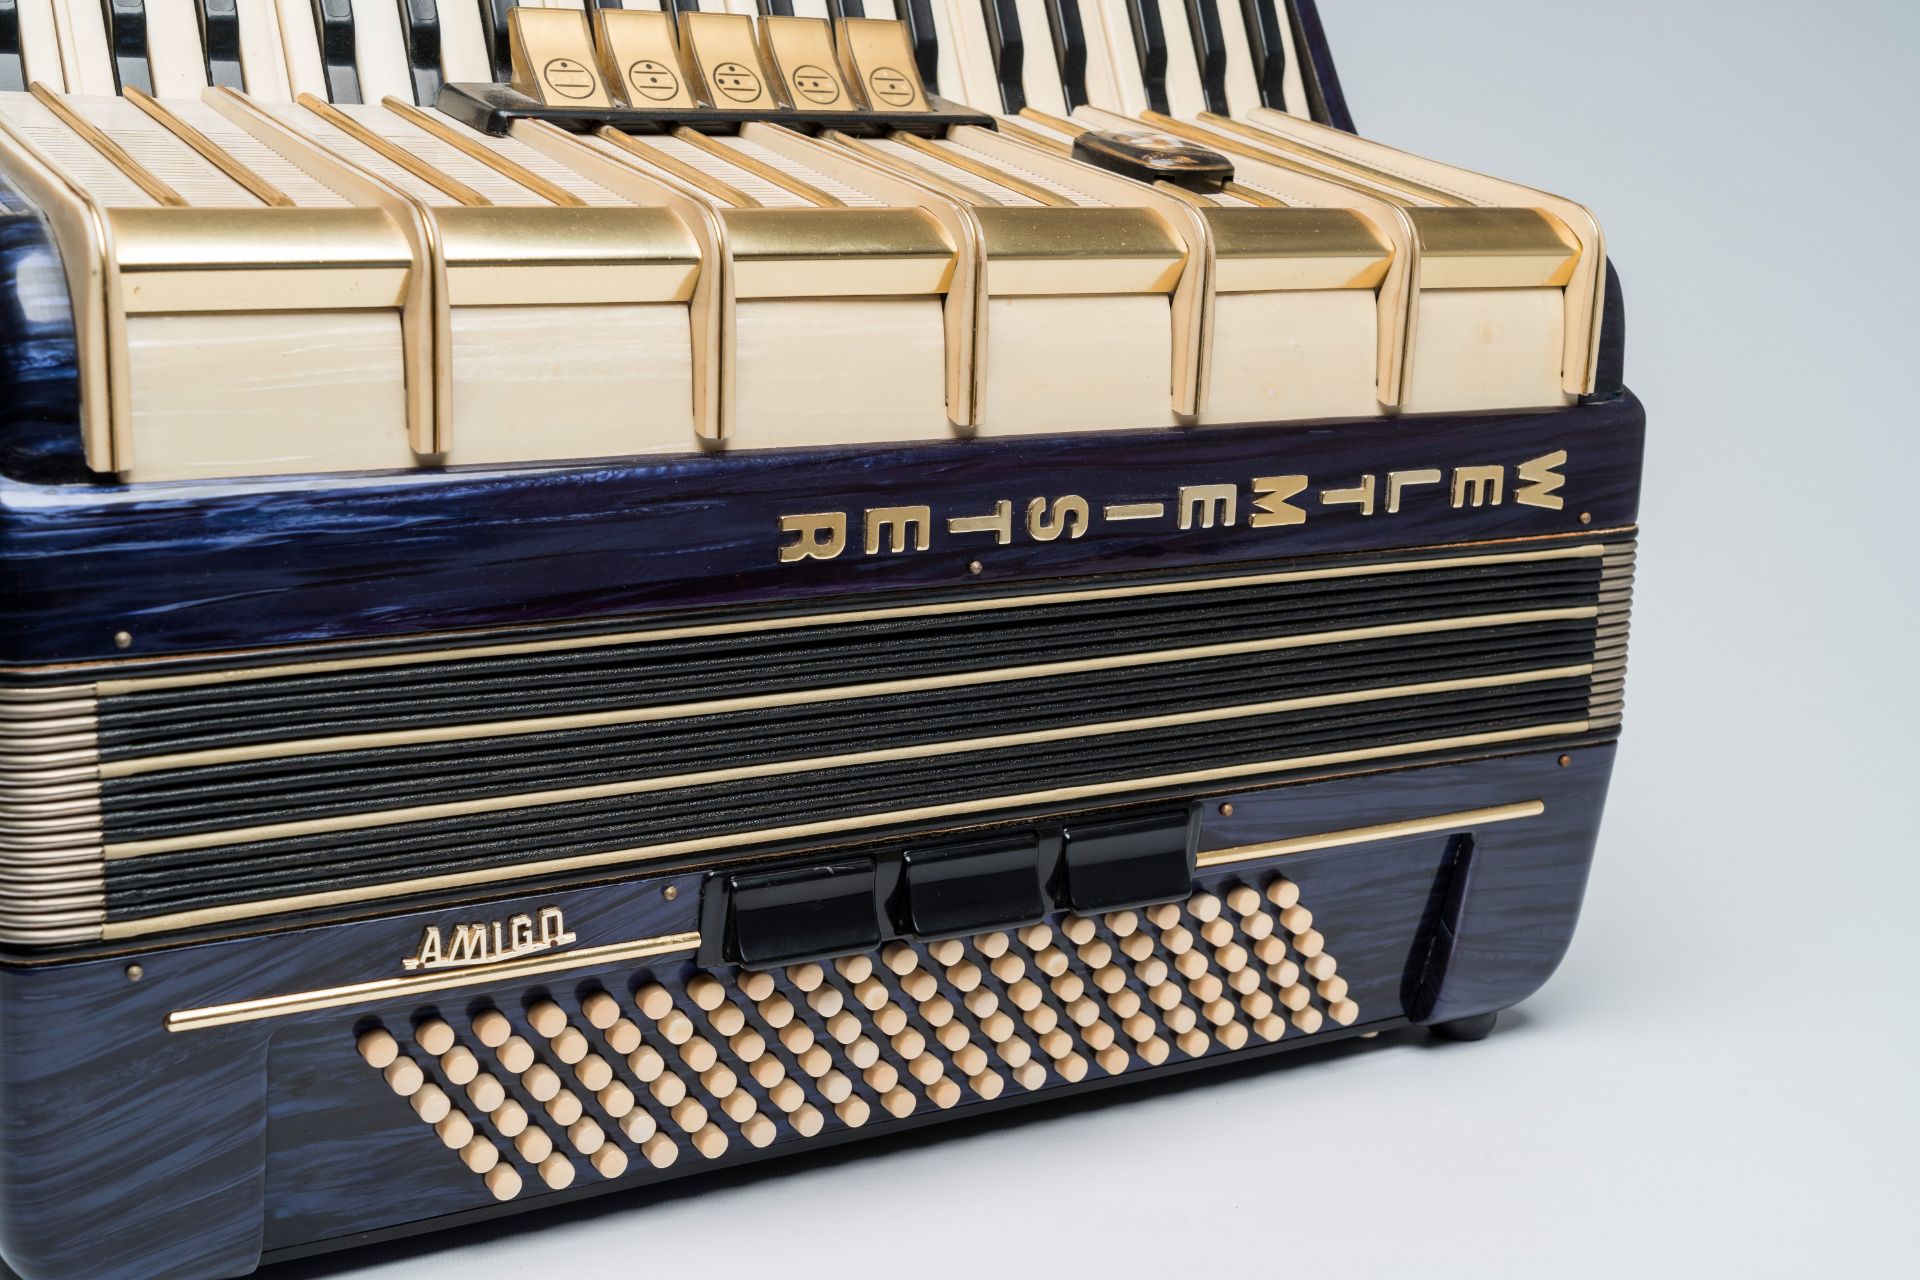 A 'Weltmeister' chromatic accordion with piano keyboard, ca. 1960 - Image 4 of 5